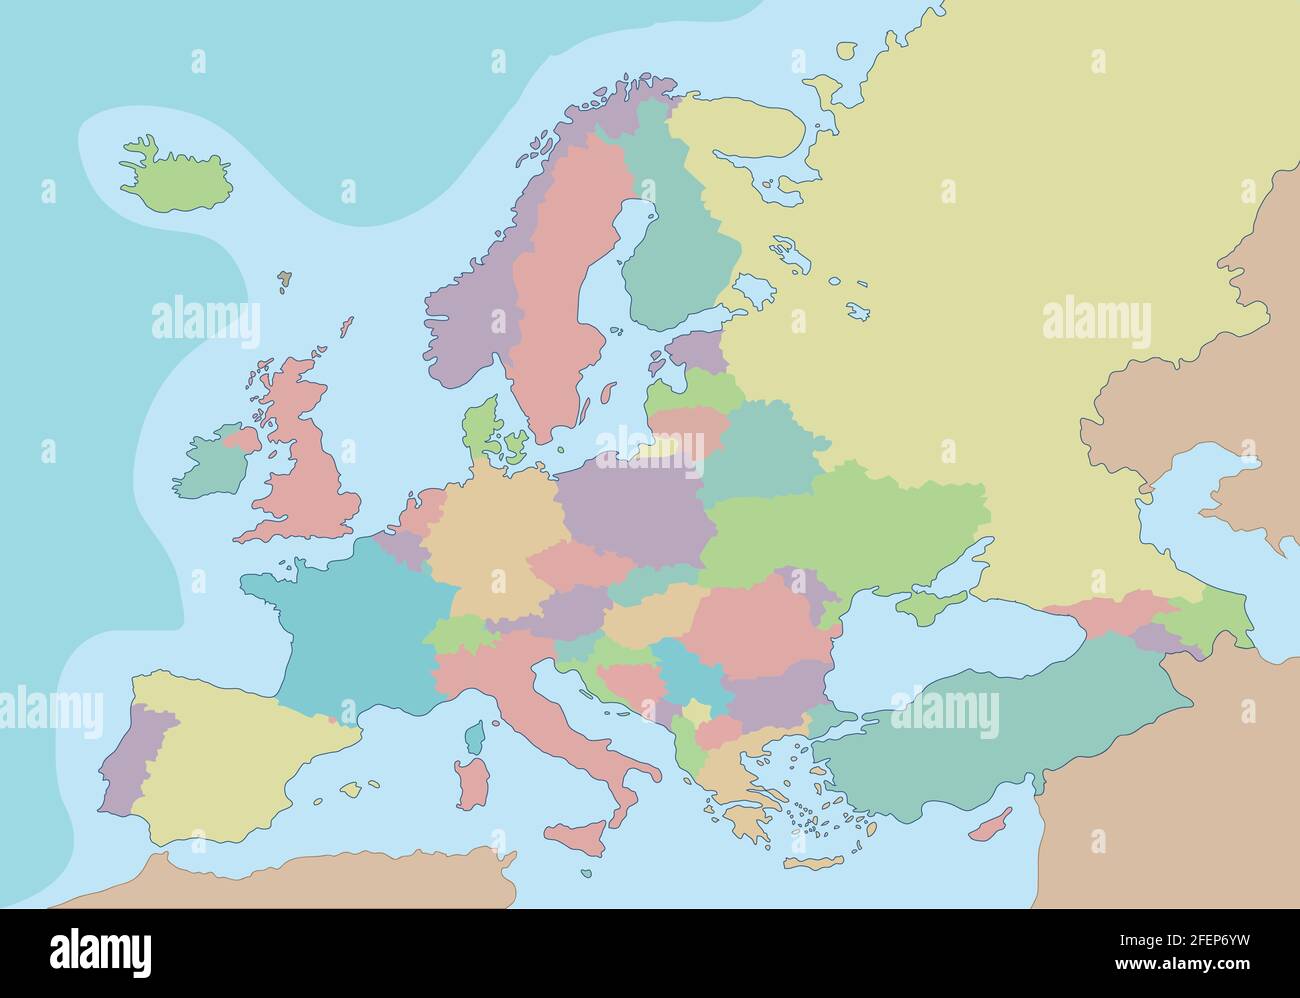 Political map of Europe with different colors for each country. Vector illustration. Stock Vector